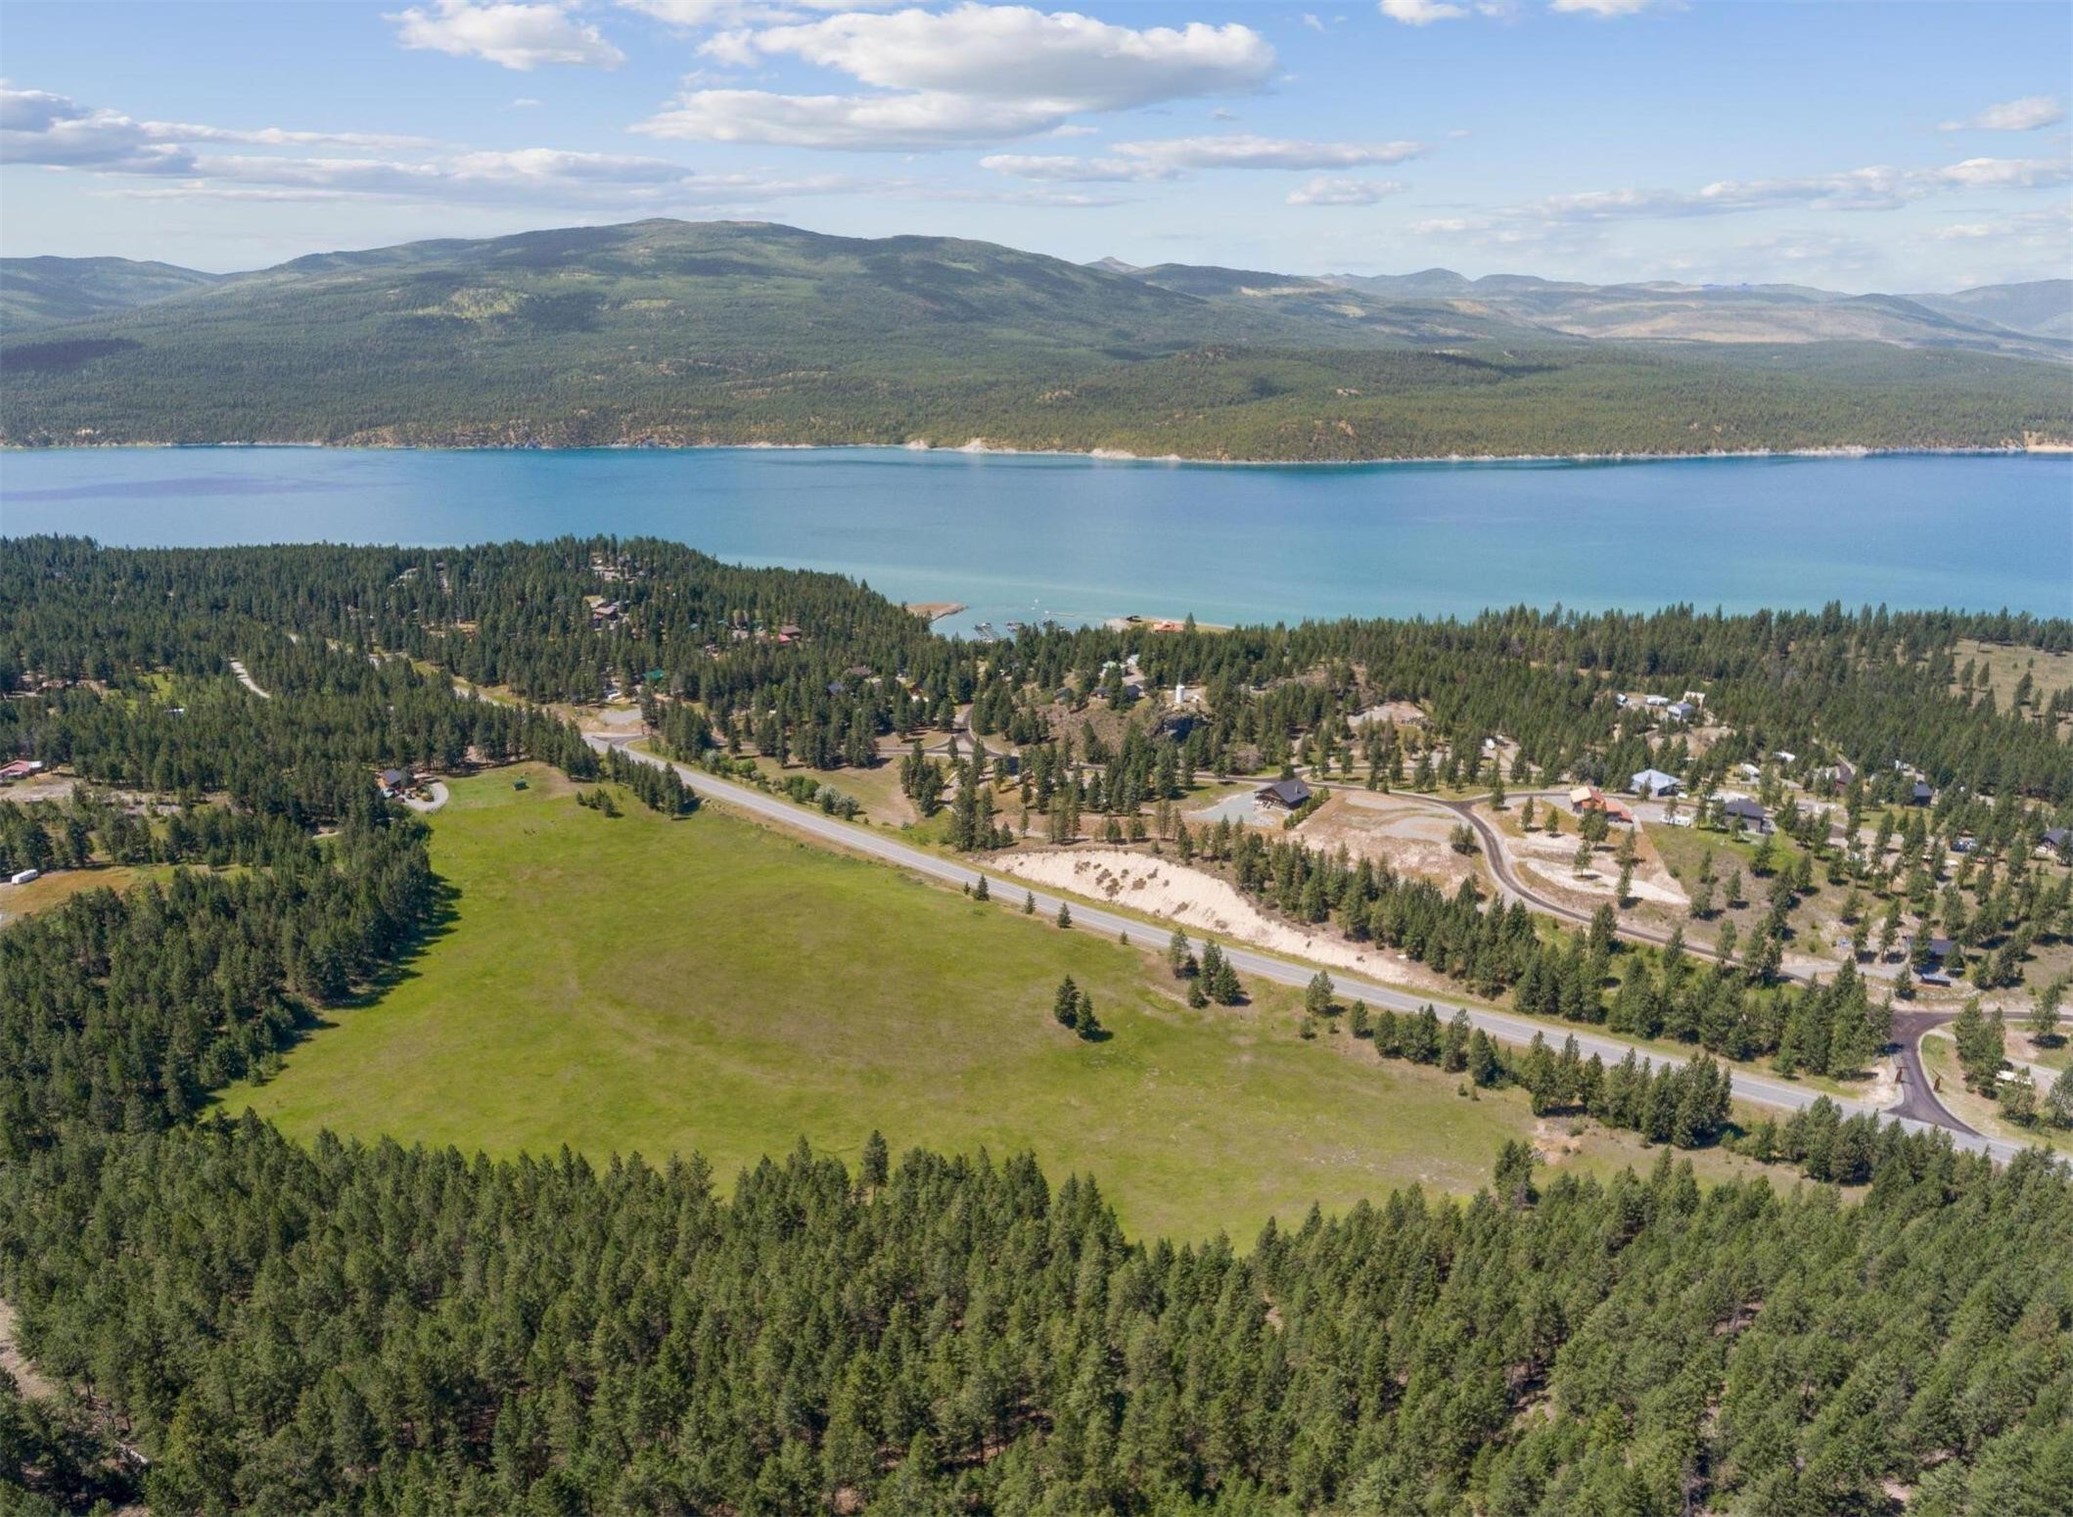 This one-of-a-kind property paints the perfect picture for Montana living. 12.69 acres of prime land, sitting only two minutes from a public ramp on Lake Koocanusa, ready for you!This property has amazing views of Lake Koocanusa and the surrounding area. It is located only 10 minutes from the Canadian Border, a little over an hour from Glacier National Park and Glacier International Airport, and less than a morning's drive to 3 snow/ski resorts. Property is pre-plat status. Tobacco Valley is at one of the lowest elevations in Montana, and this property really shows the beauty of that. With the opportunity to own a couple of horses, and much more this property is a dream. Call Terry Comstock at (406) 250-7722,  or your Real Estate Professional today.